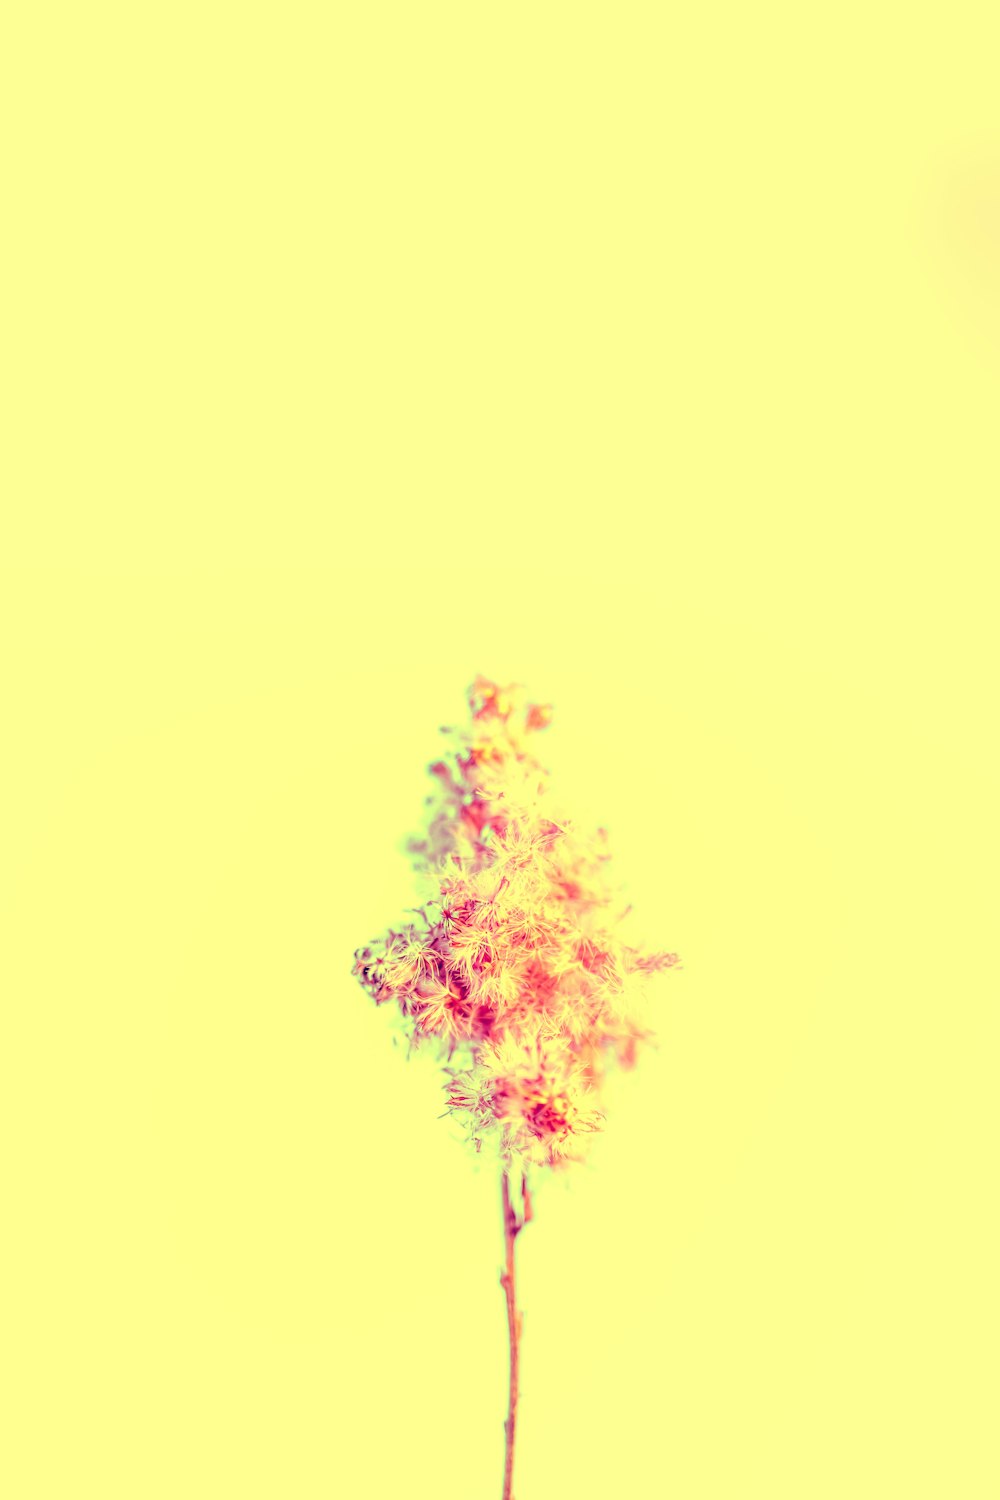 a single flower in a vase on a yellow background